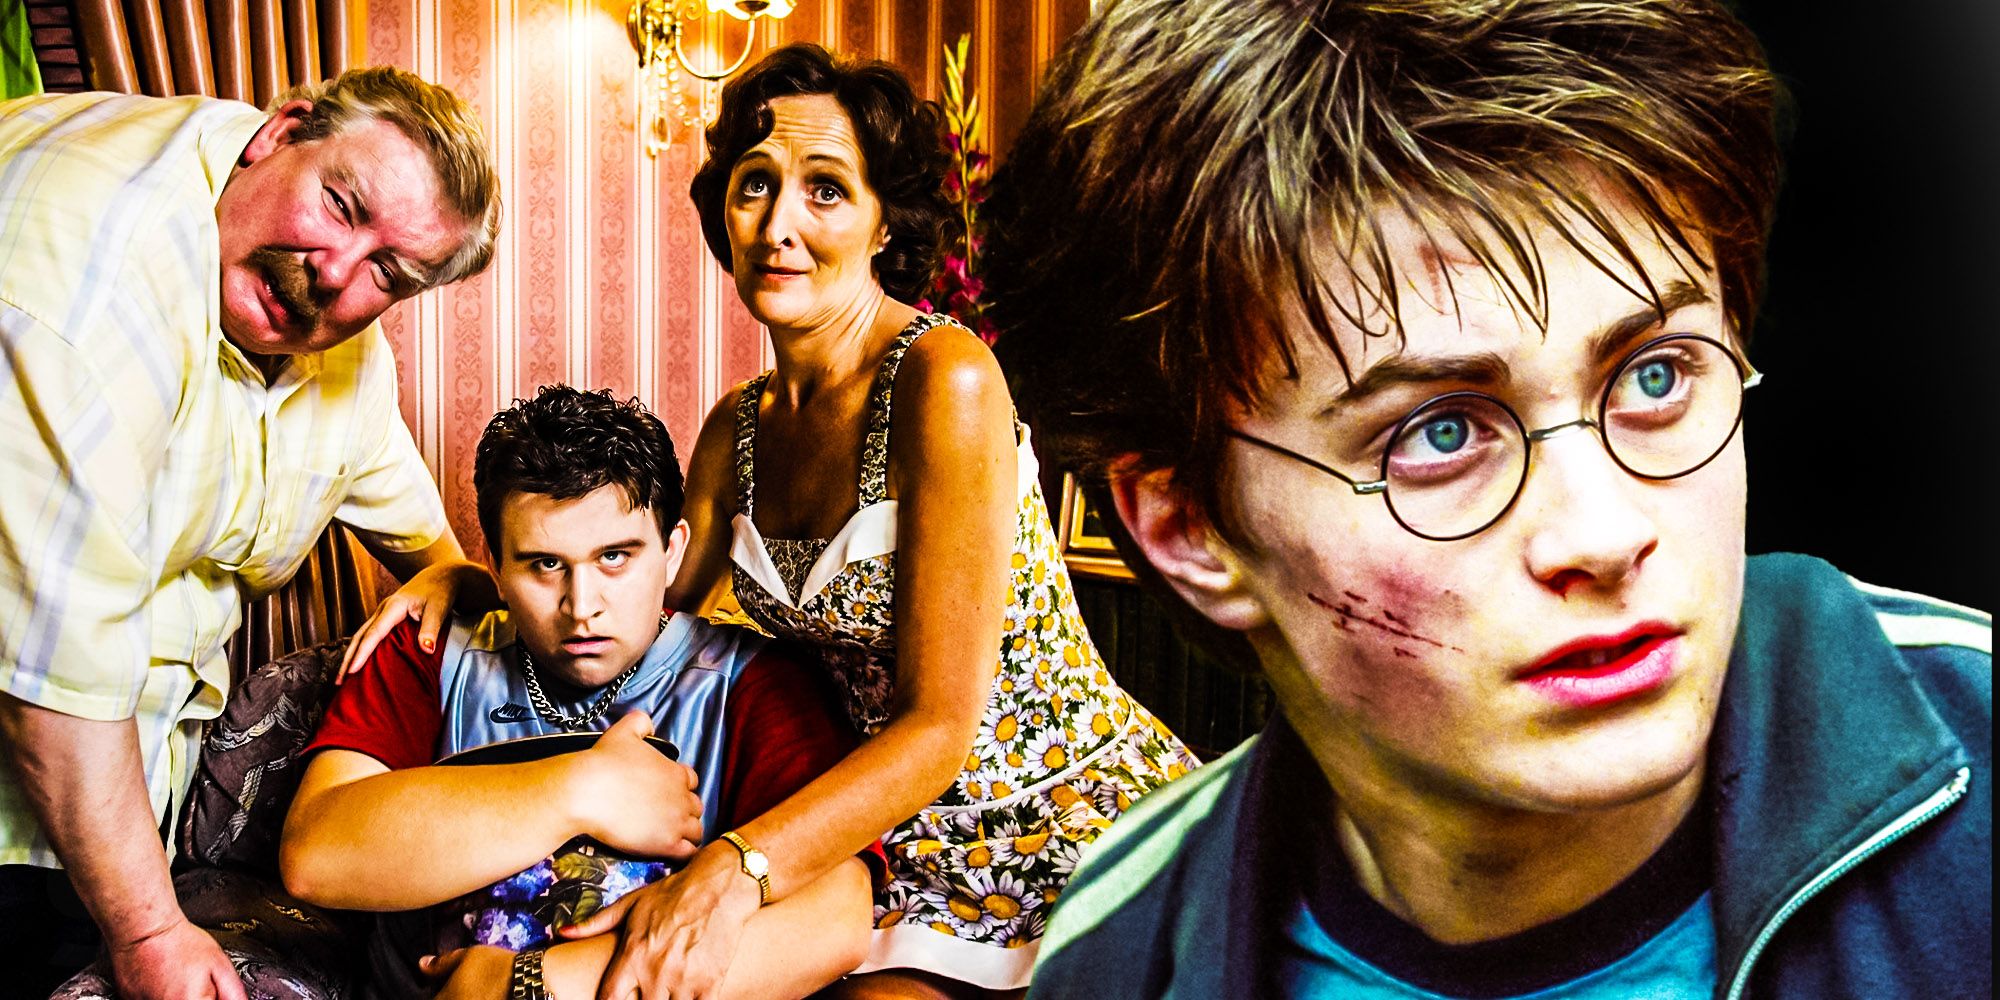 A collage features Vernon, Dudley, and Petunia Dursley after Dudley is attacked by a Dementor in Harry Potter and the Order of the Phoenix and Daniel Radcliffe s Harry Potter